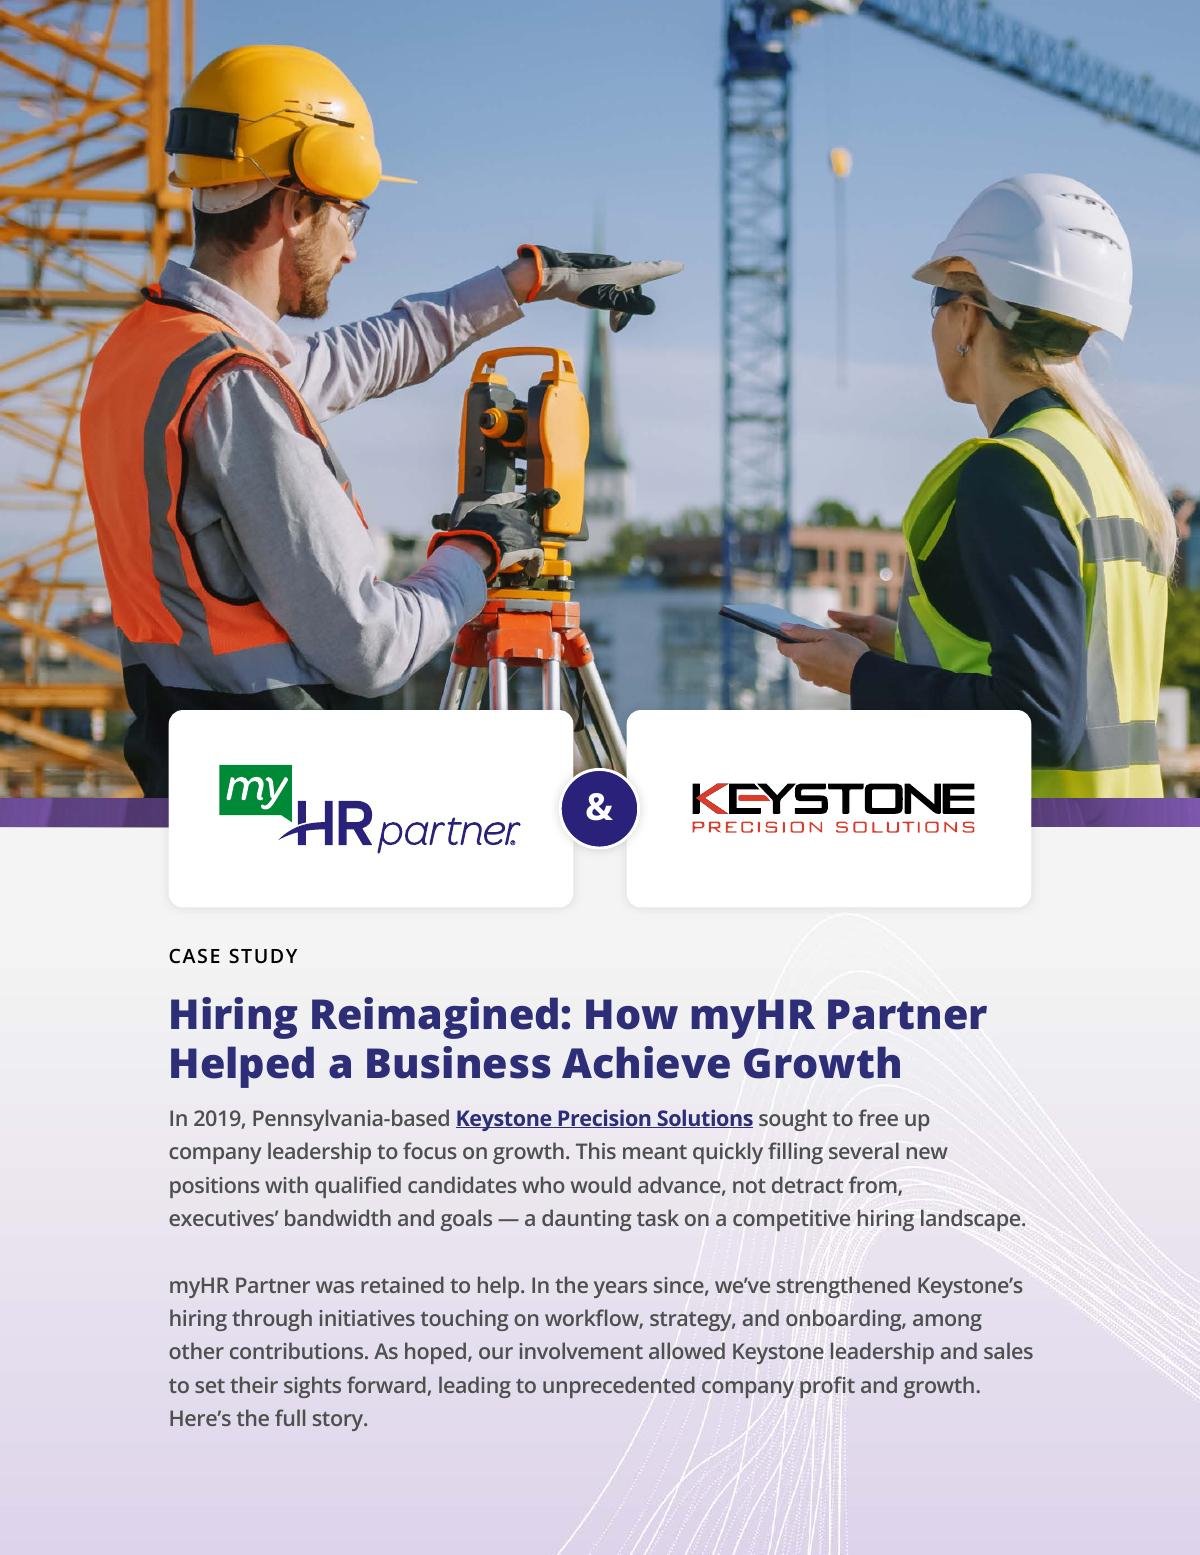 Hiring Reimagined: How myHR Partner Helped a Business Achieve Growth